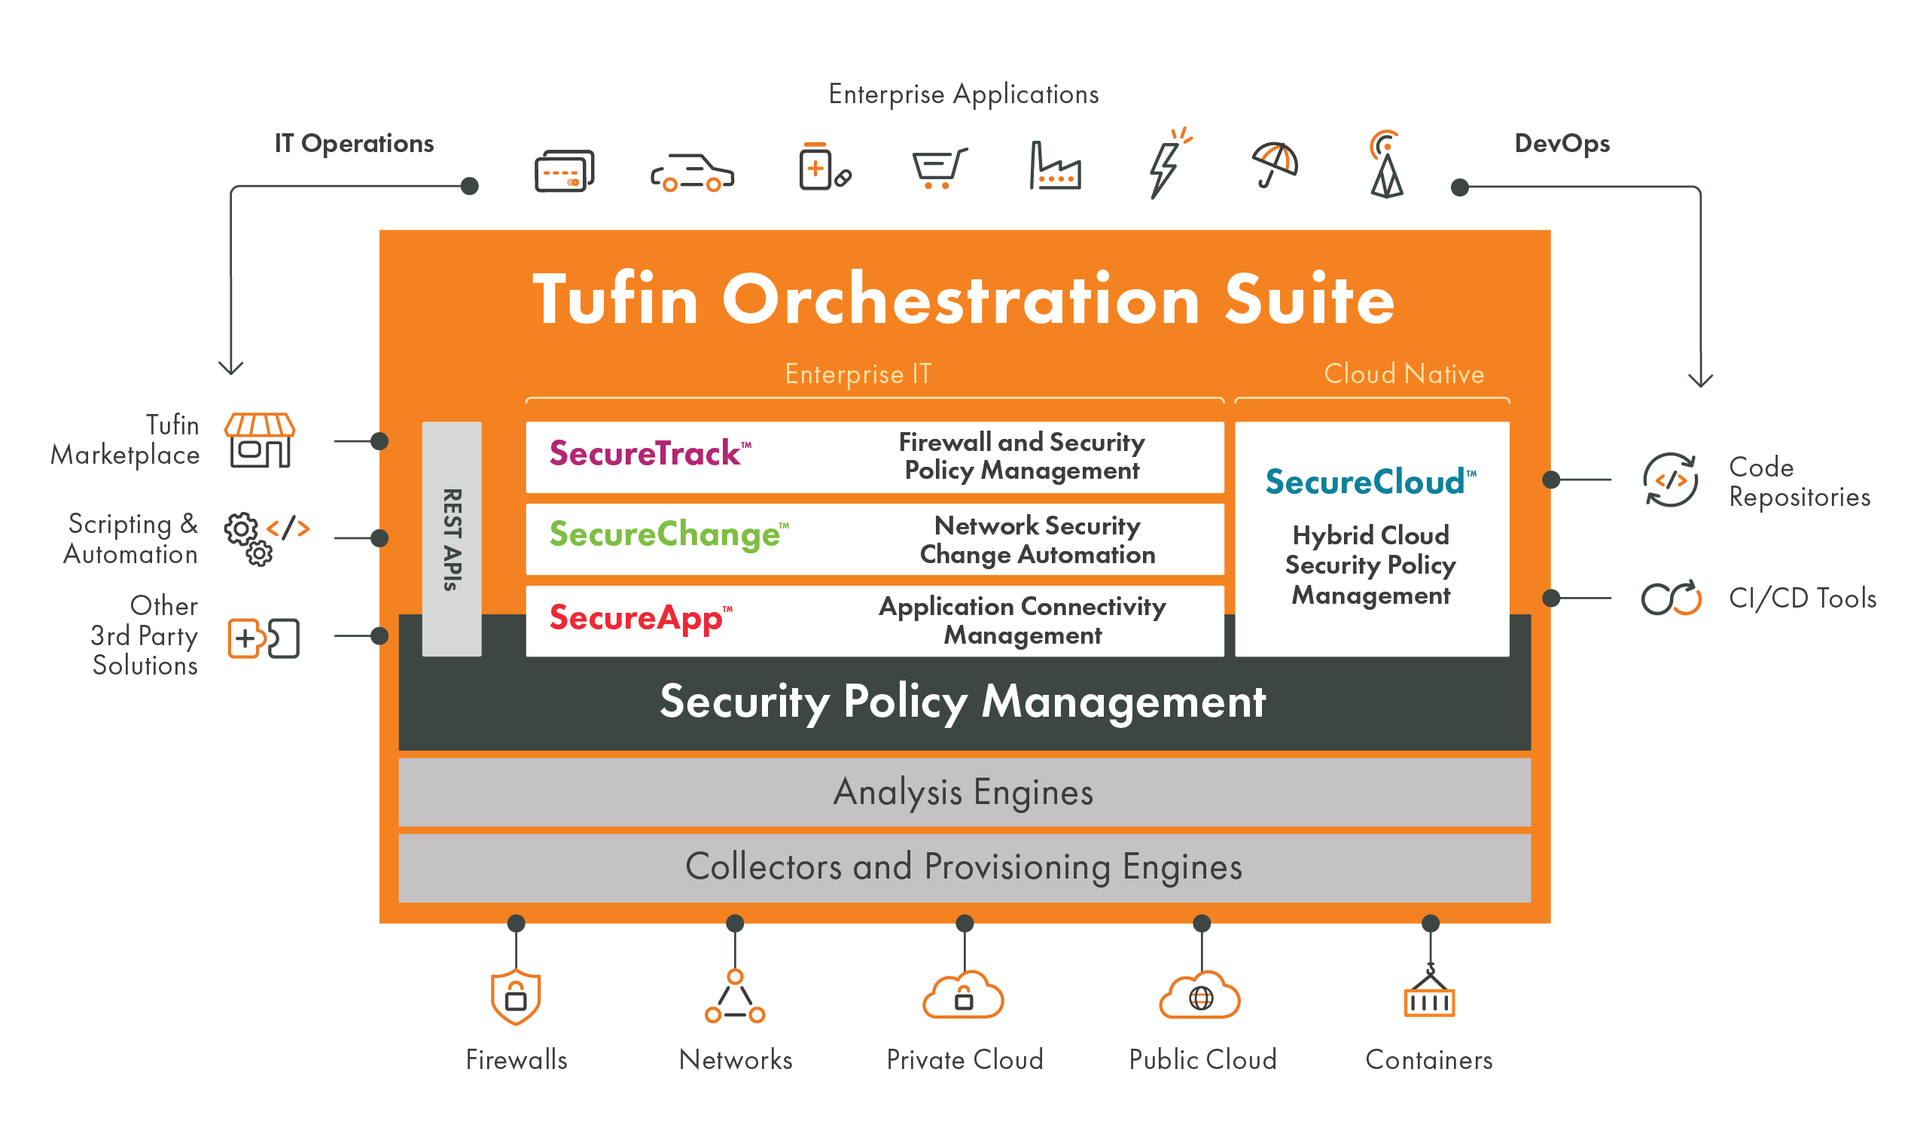 The Tufin Orchestration Suite is a centralized security management layer.